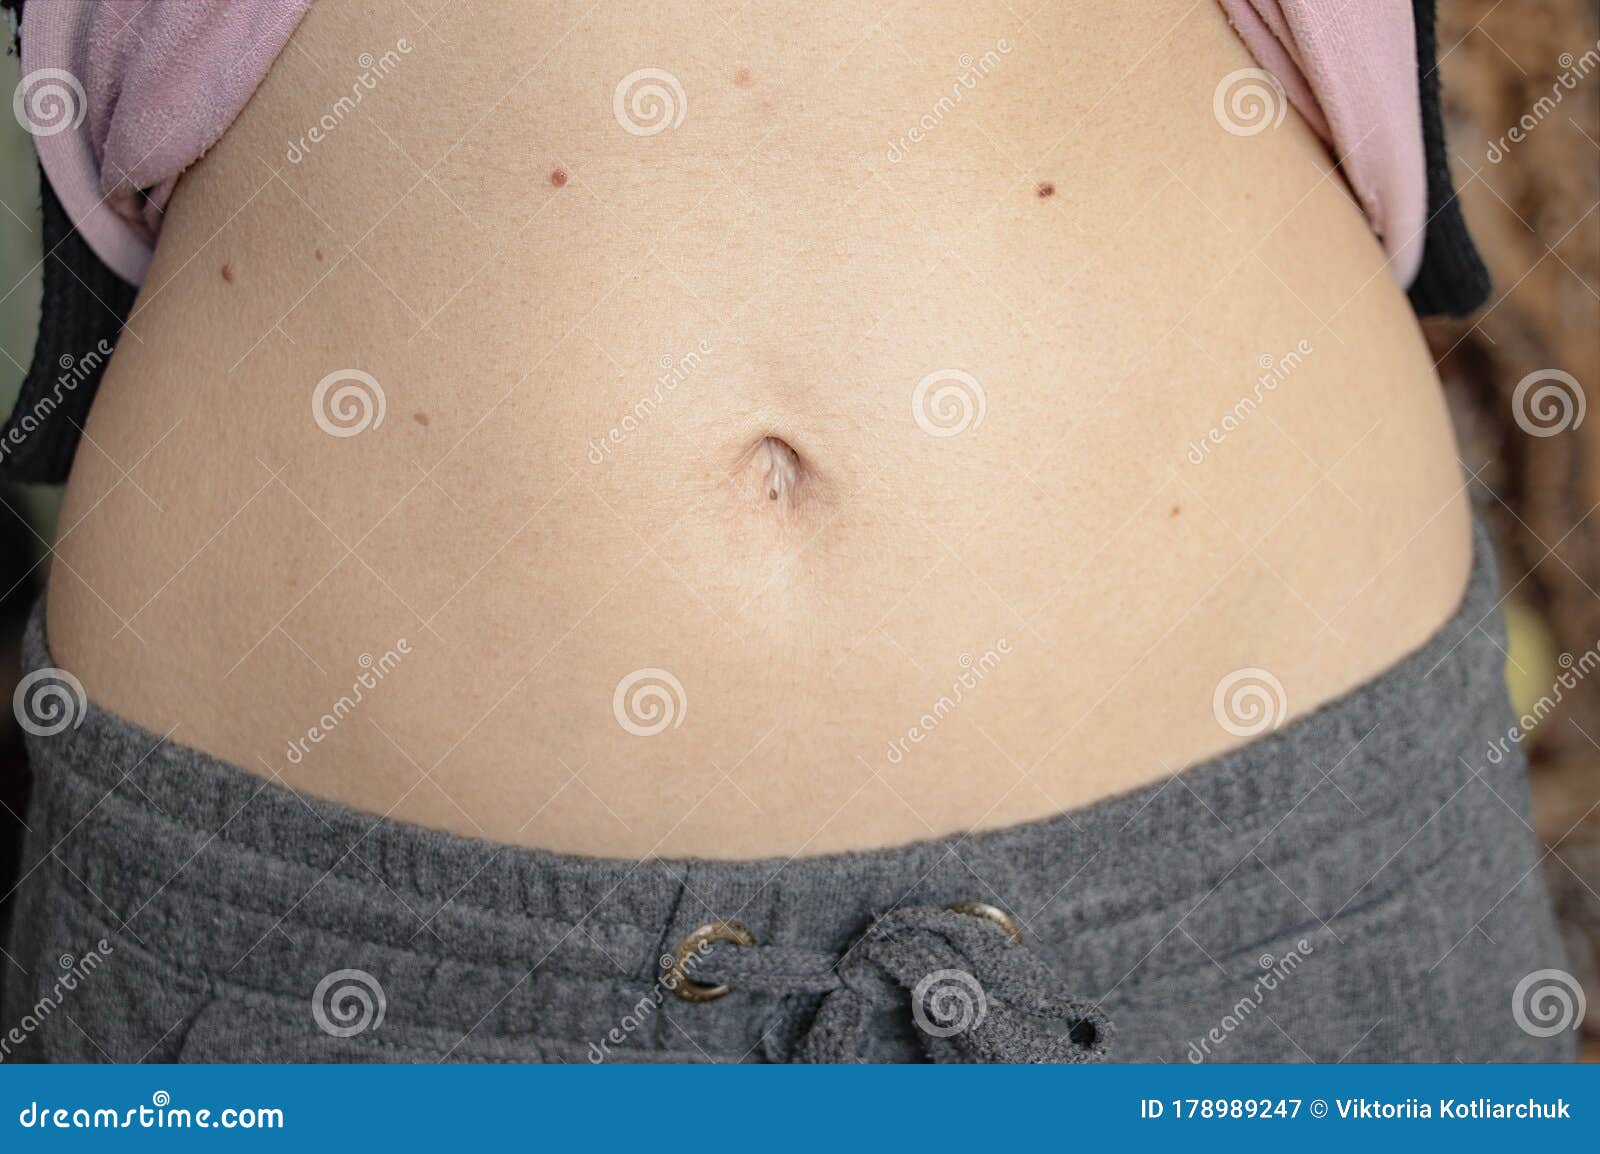 Young girl belly button